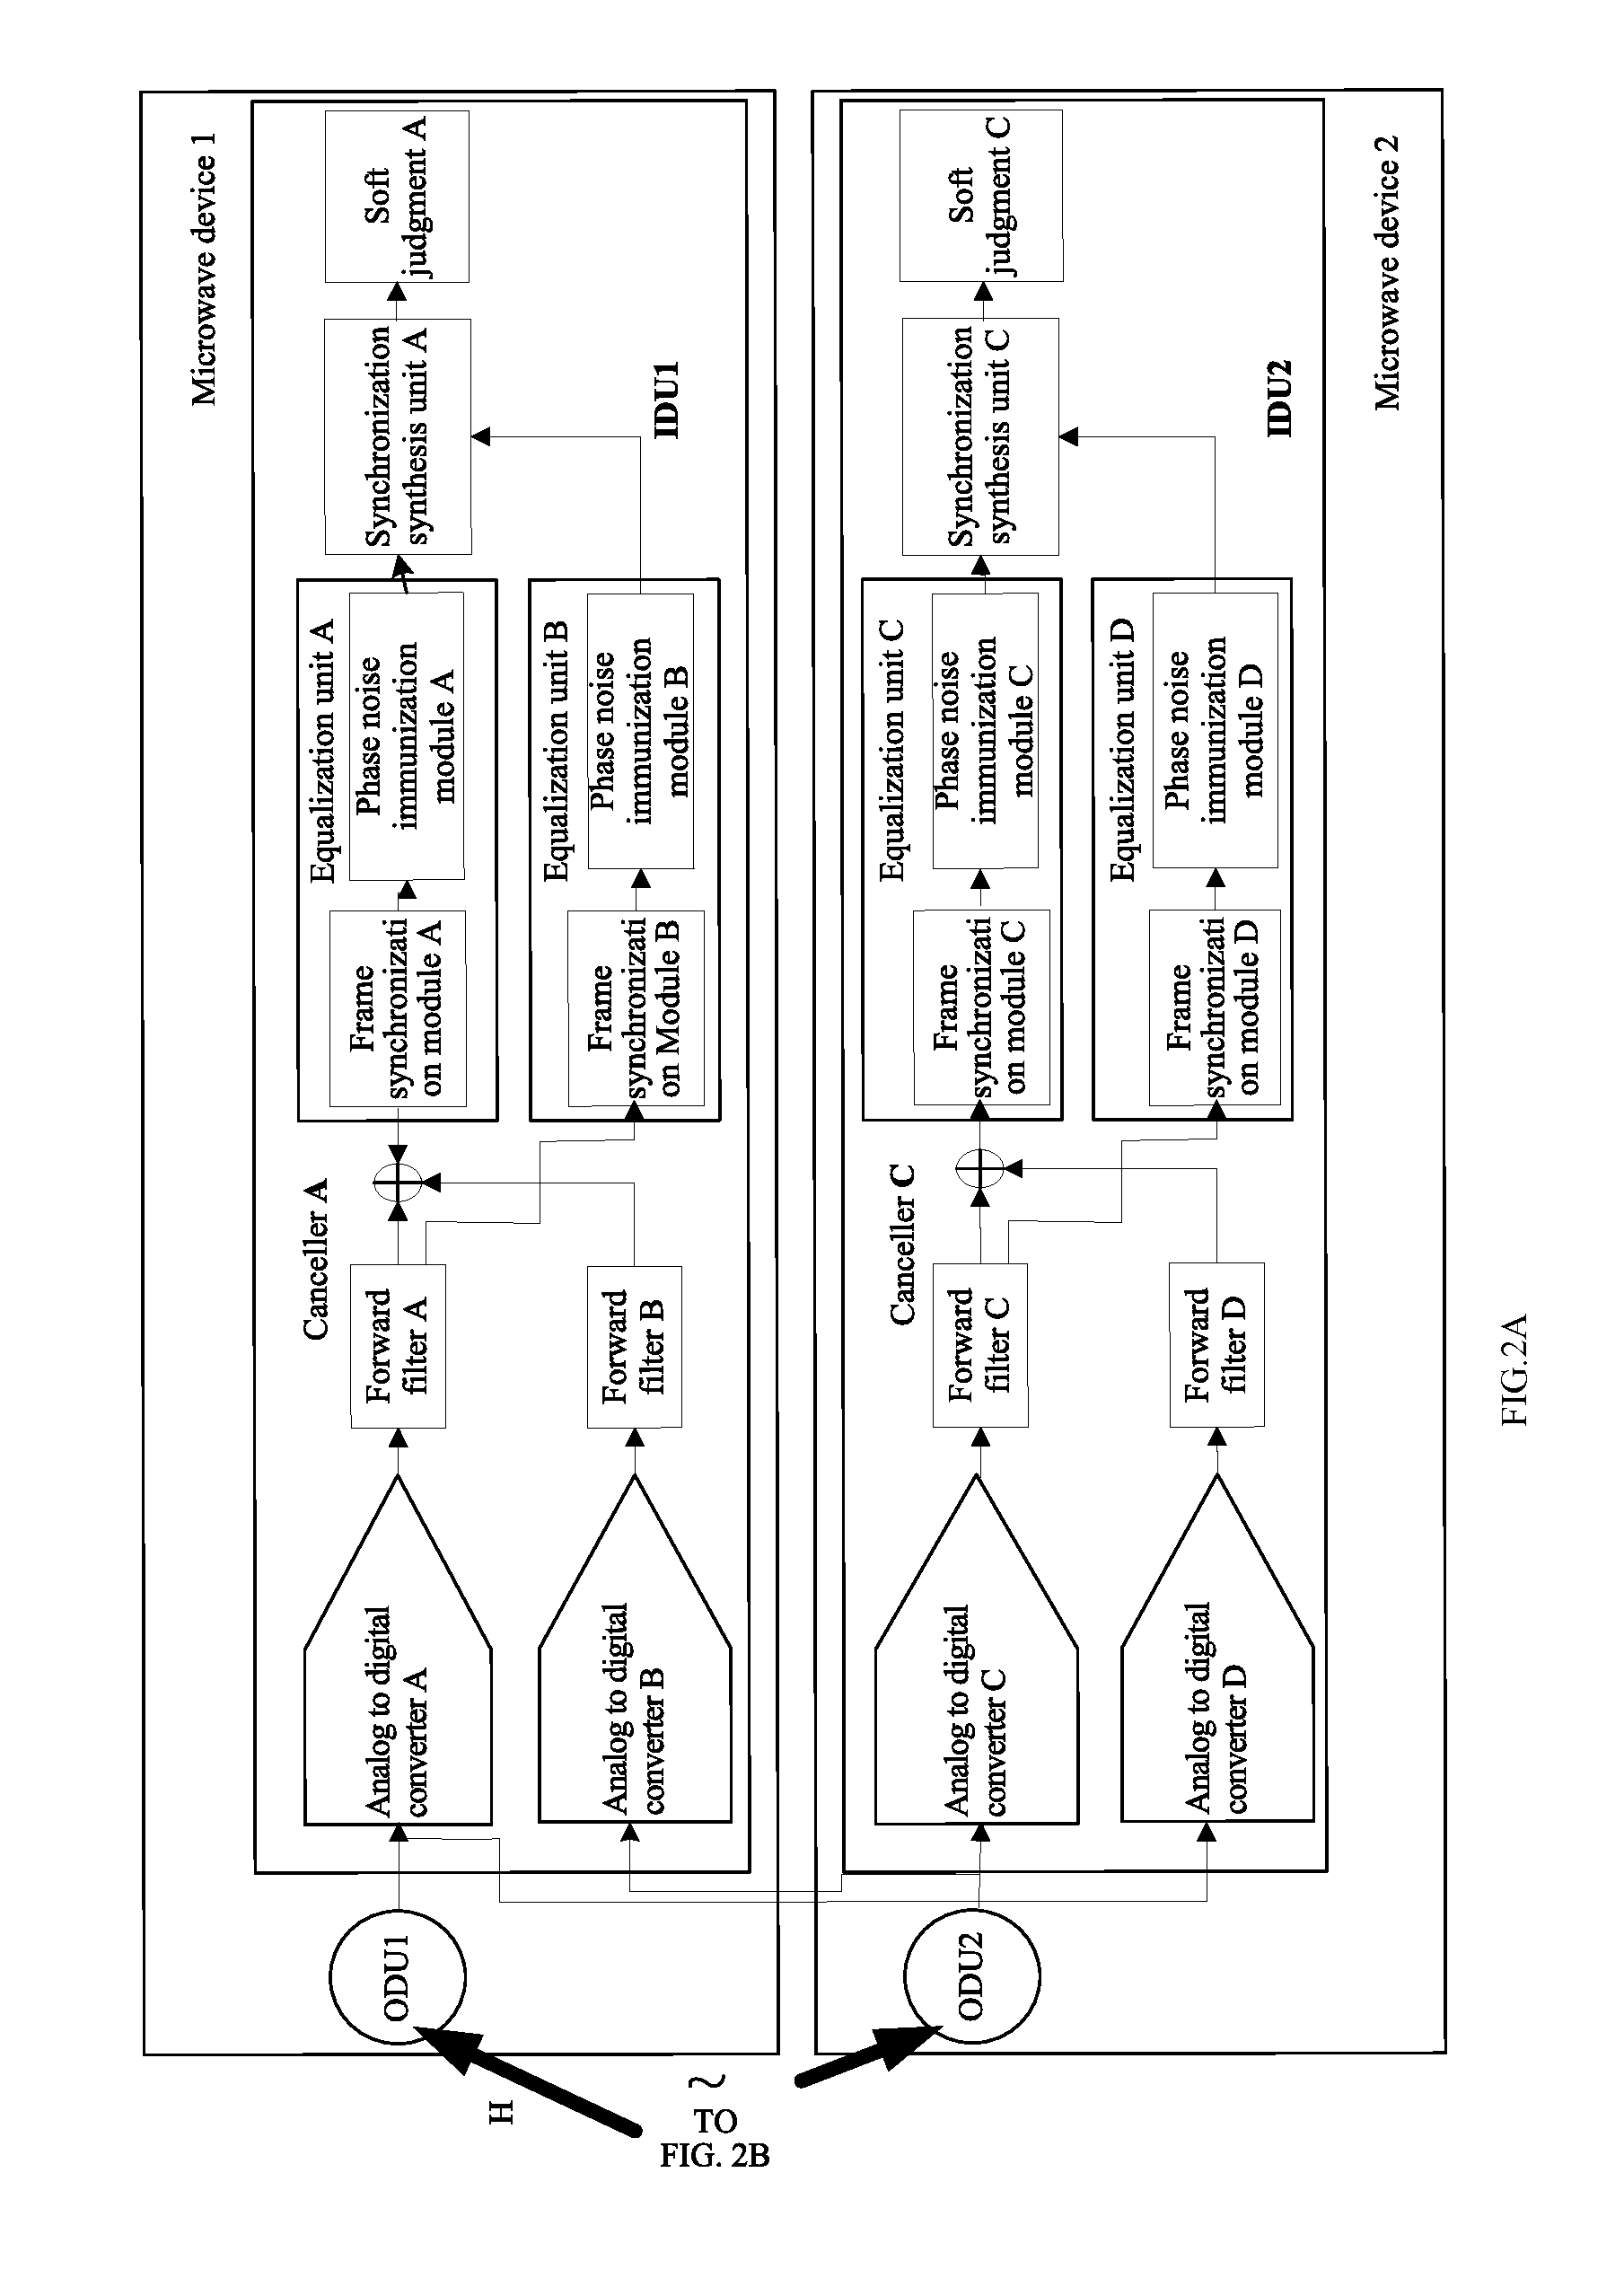 Co-Channel Dual Polarized Microwave Device and Method for Receiving Receive Signal